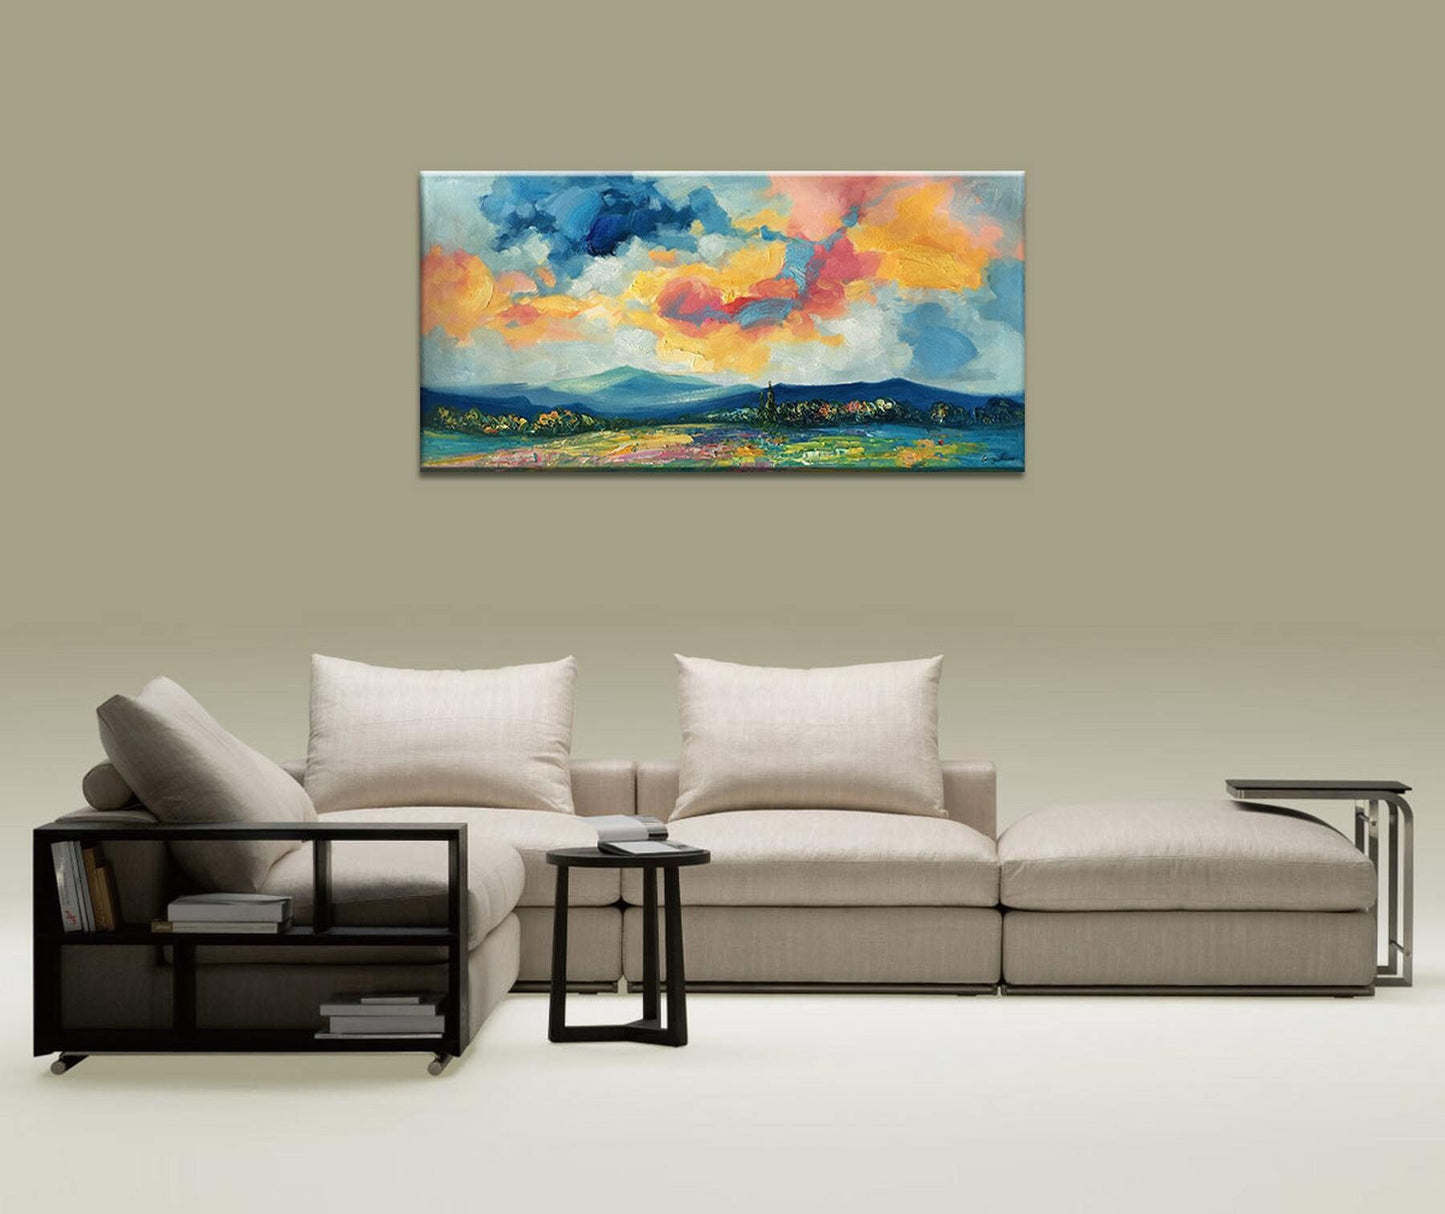 Abstract Landscape Oil Painting, Fine Art, Paintings On Canvas, Landscape, Extra Large Wall Art, Hand Painted, Modern Painting